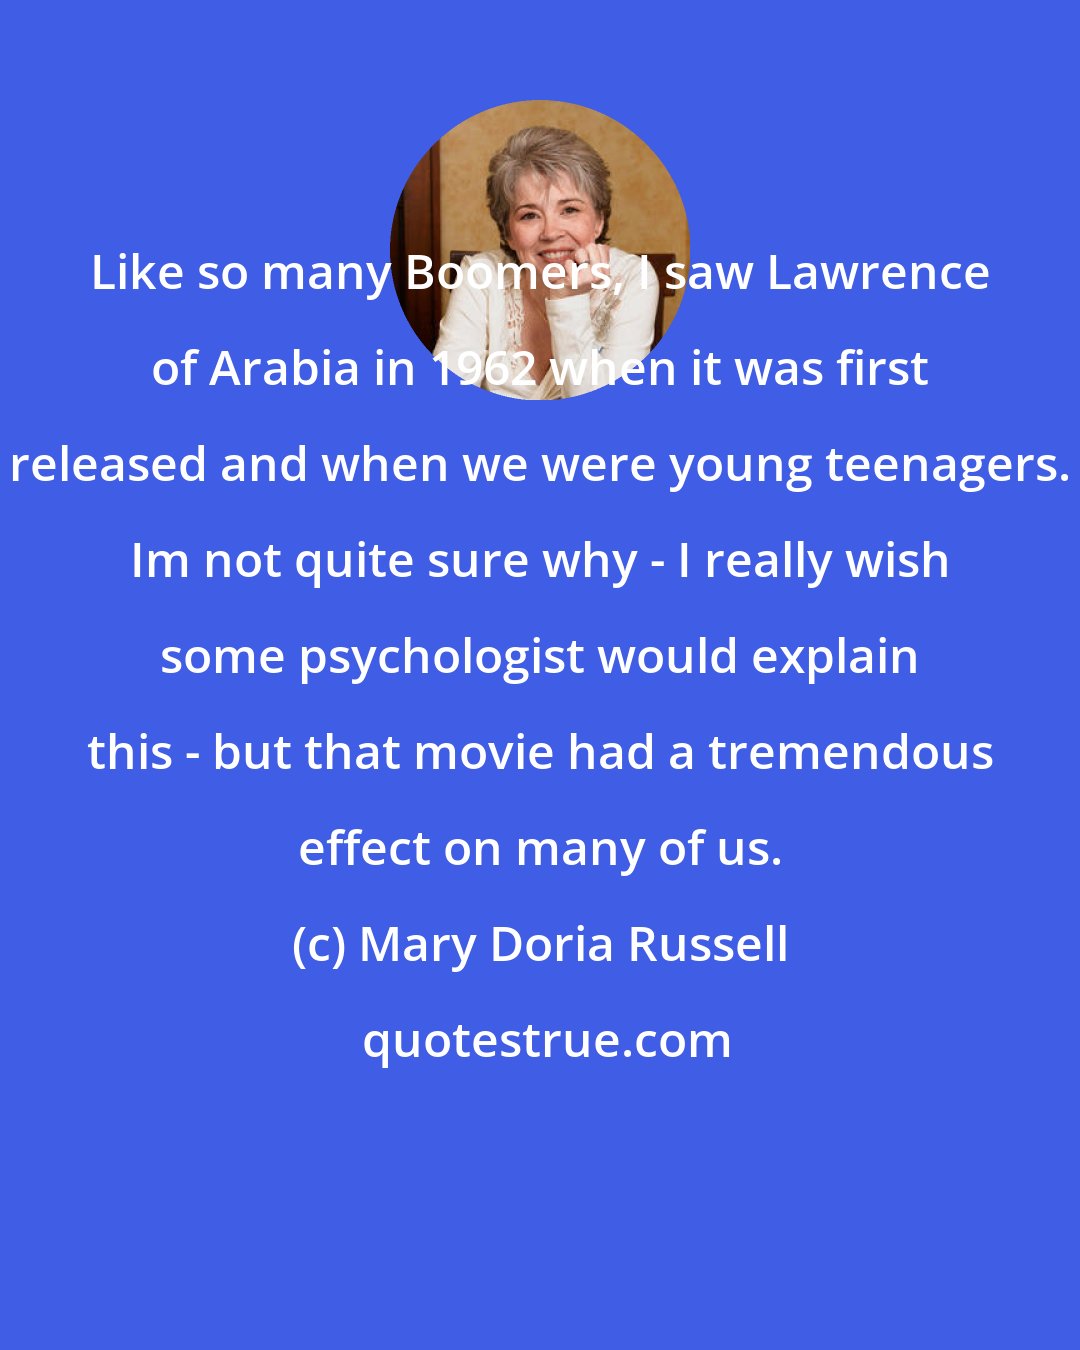 Mary Doria Russell: Like so many Boomers, I saw Lawrence of Arabia in 1962 when it was first released and when we were young teenagers. Im not quite sure why - I really wish some psychologist would explain this - but that movie had a tremendous effect on many of us.